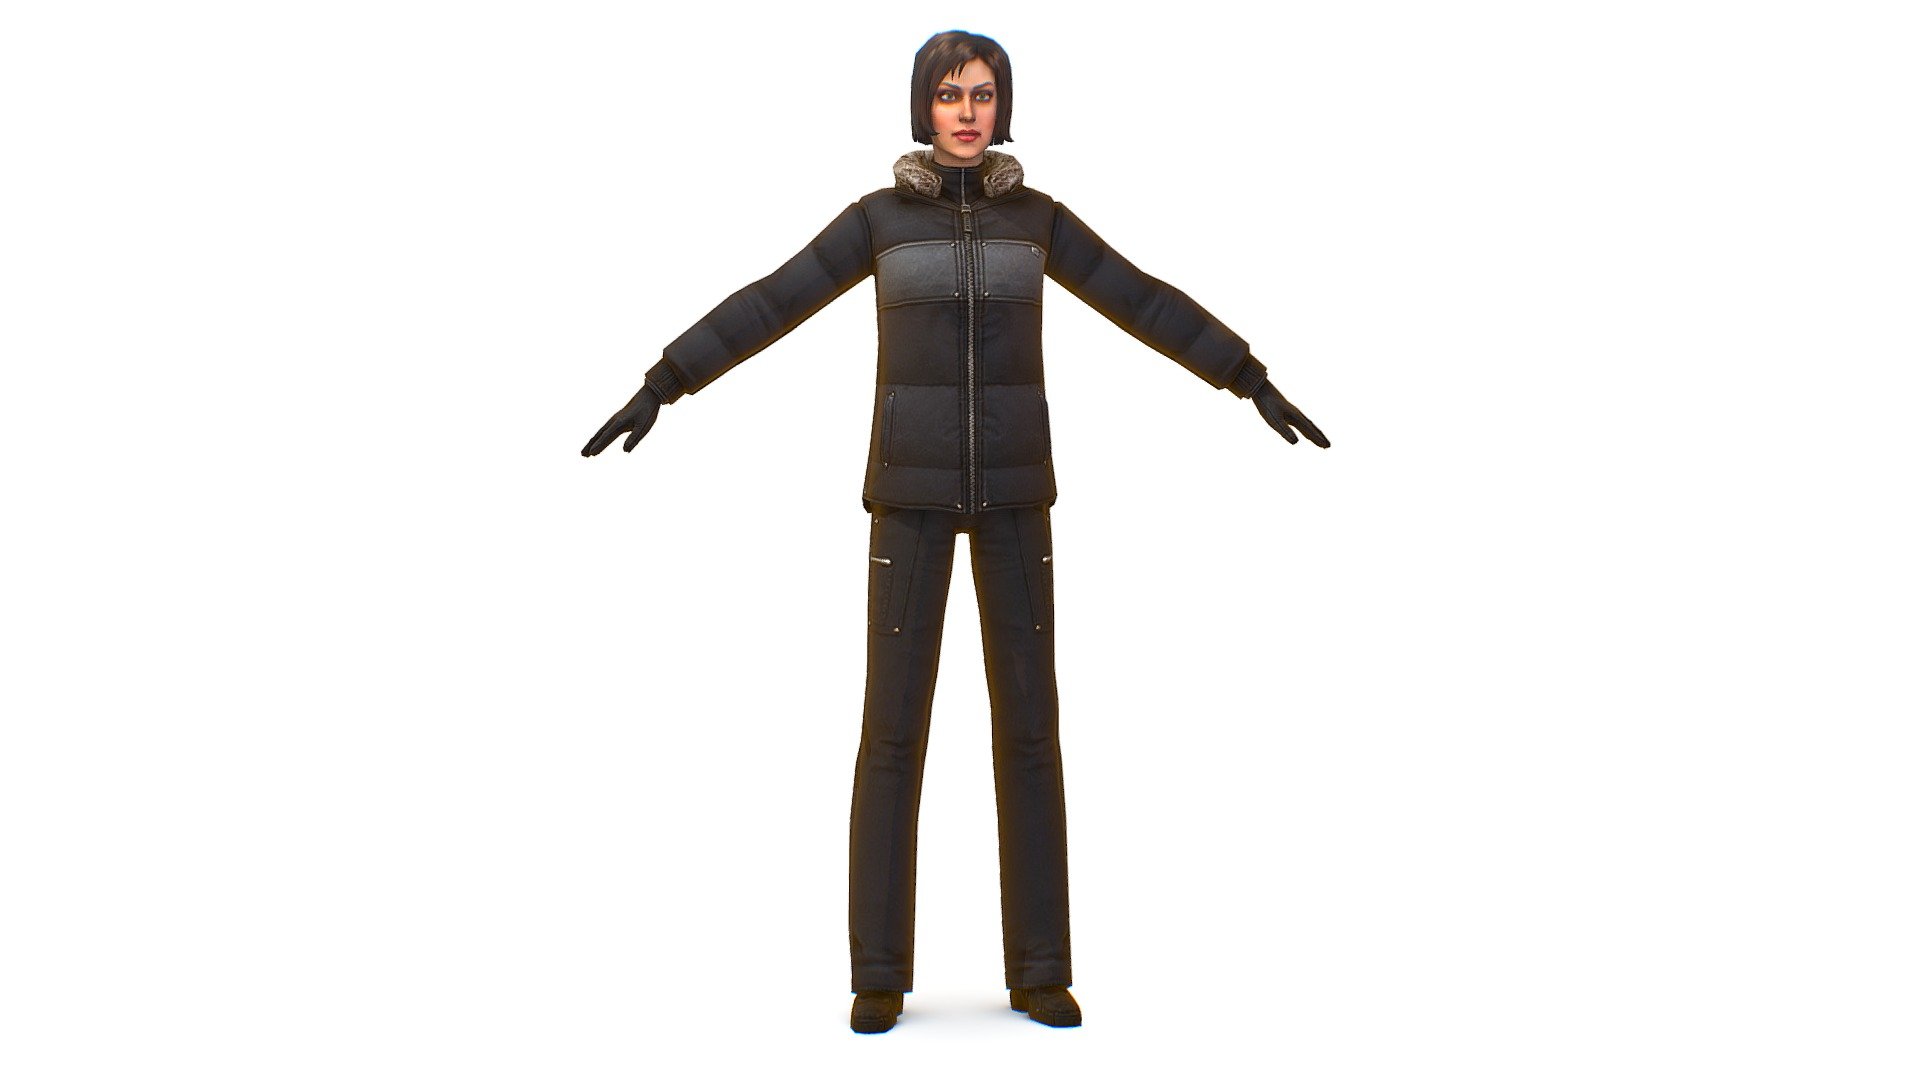 A young girl in a down jacket, a ski suit - 3dsMax file included/ texture 512 color only, head and body 3d model